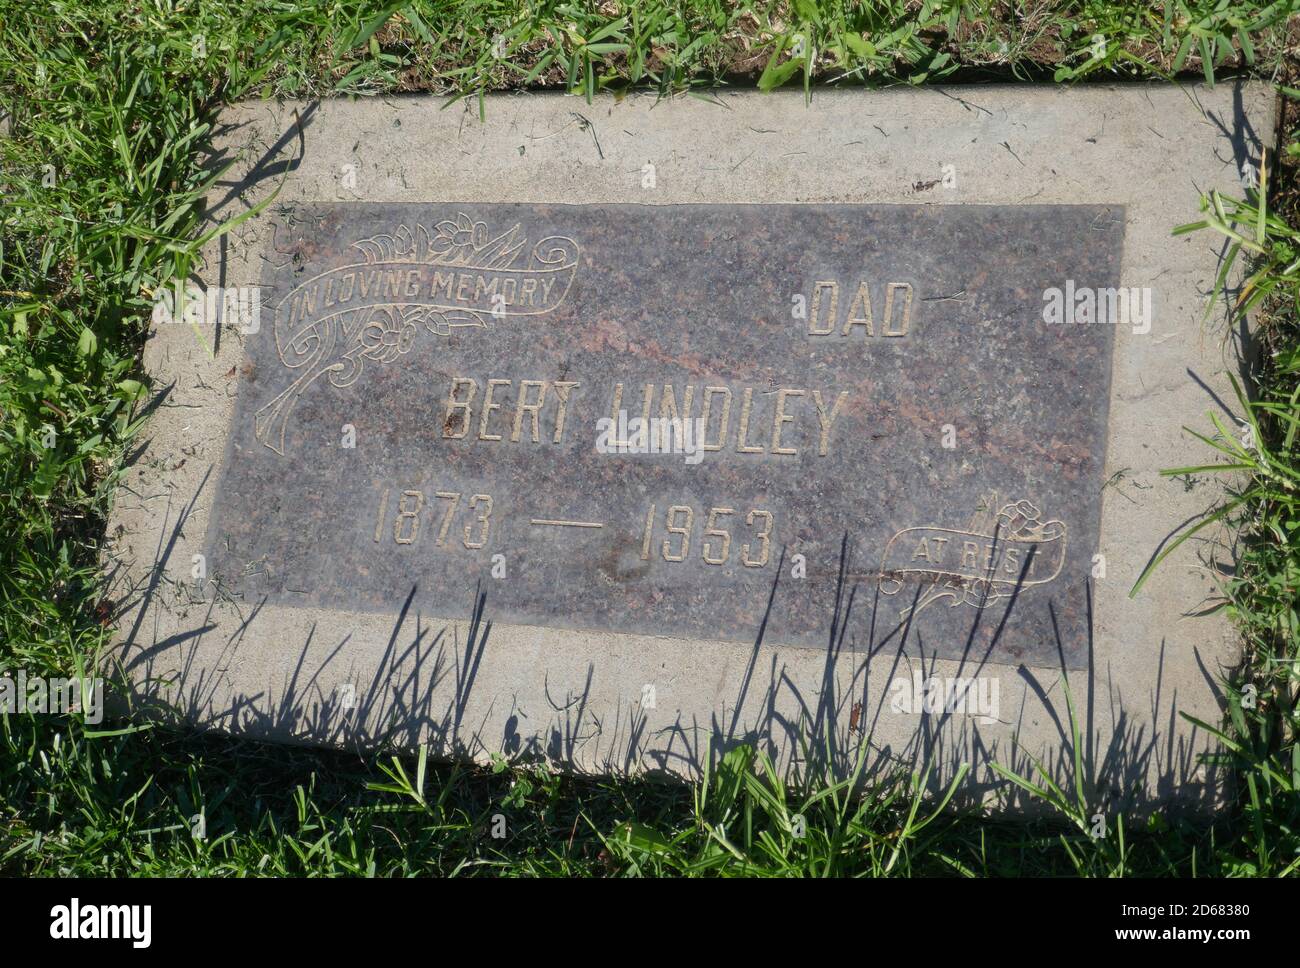 Santa Monica, California, USA 14th October 2020 A general view of atmosphere of actress Audra Lindley's Grave, unmarked, buried with her father Bert Lindley at Woodlawn Cemetery on October 14, 2020  in Santa Monica, California, USA. Photo by Barry King/Alamy Stock Photo Stock Photo